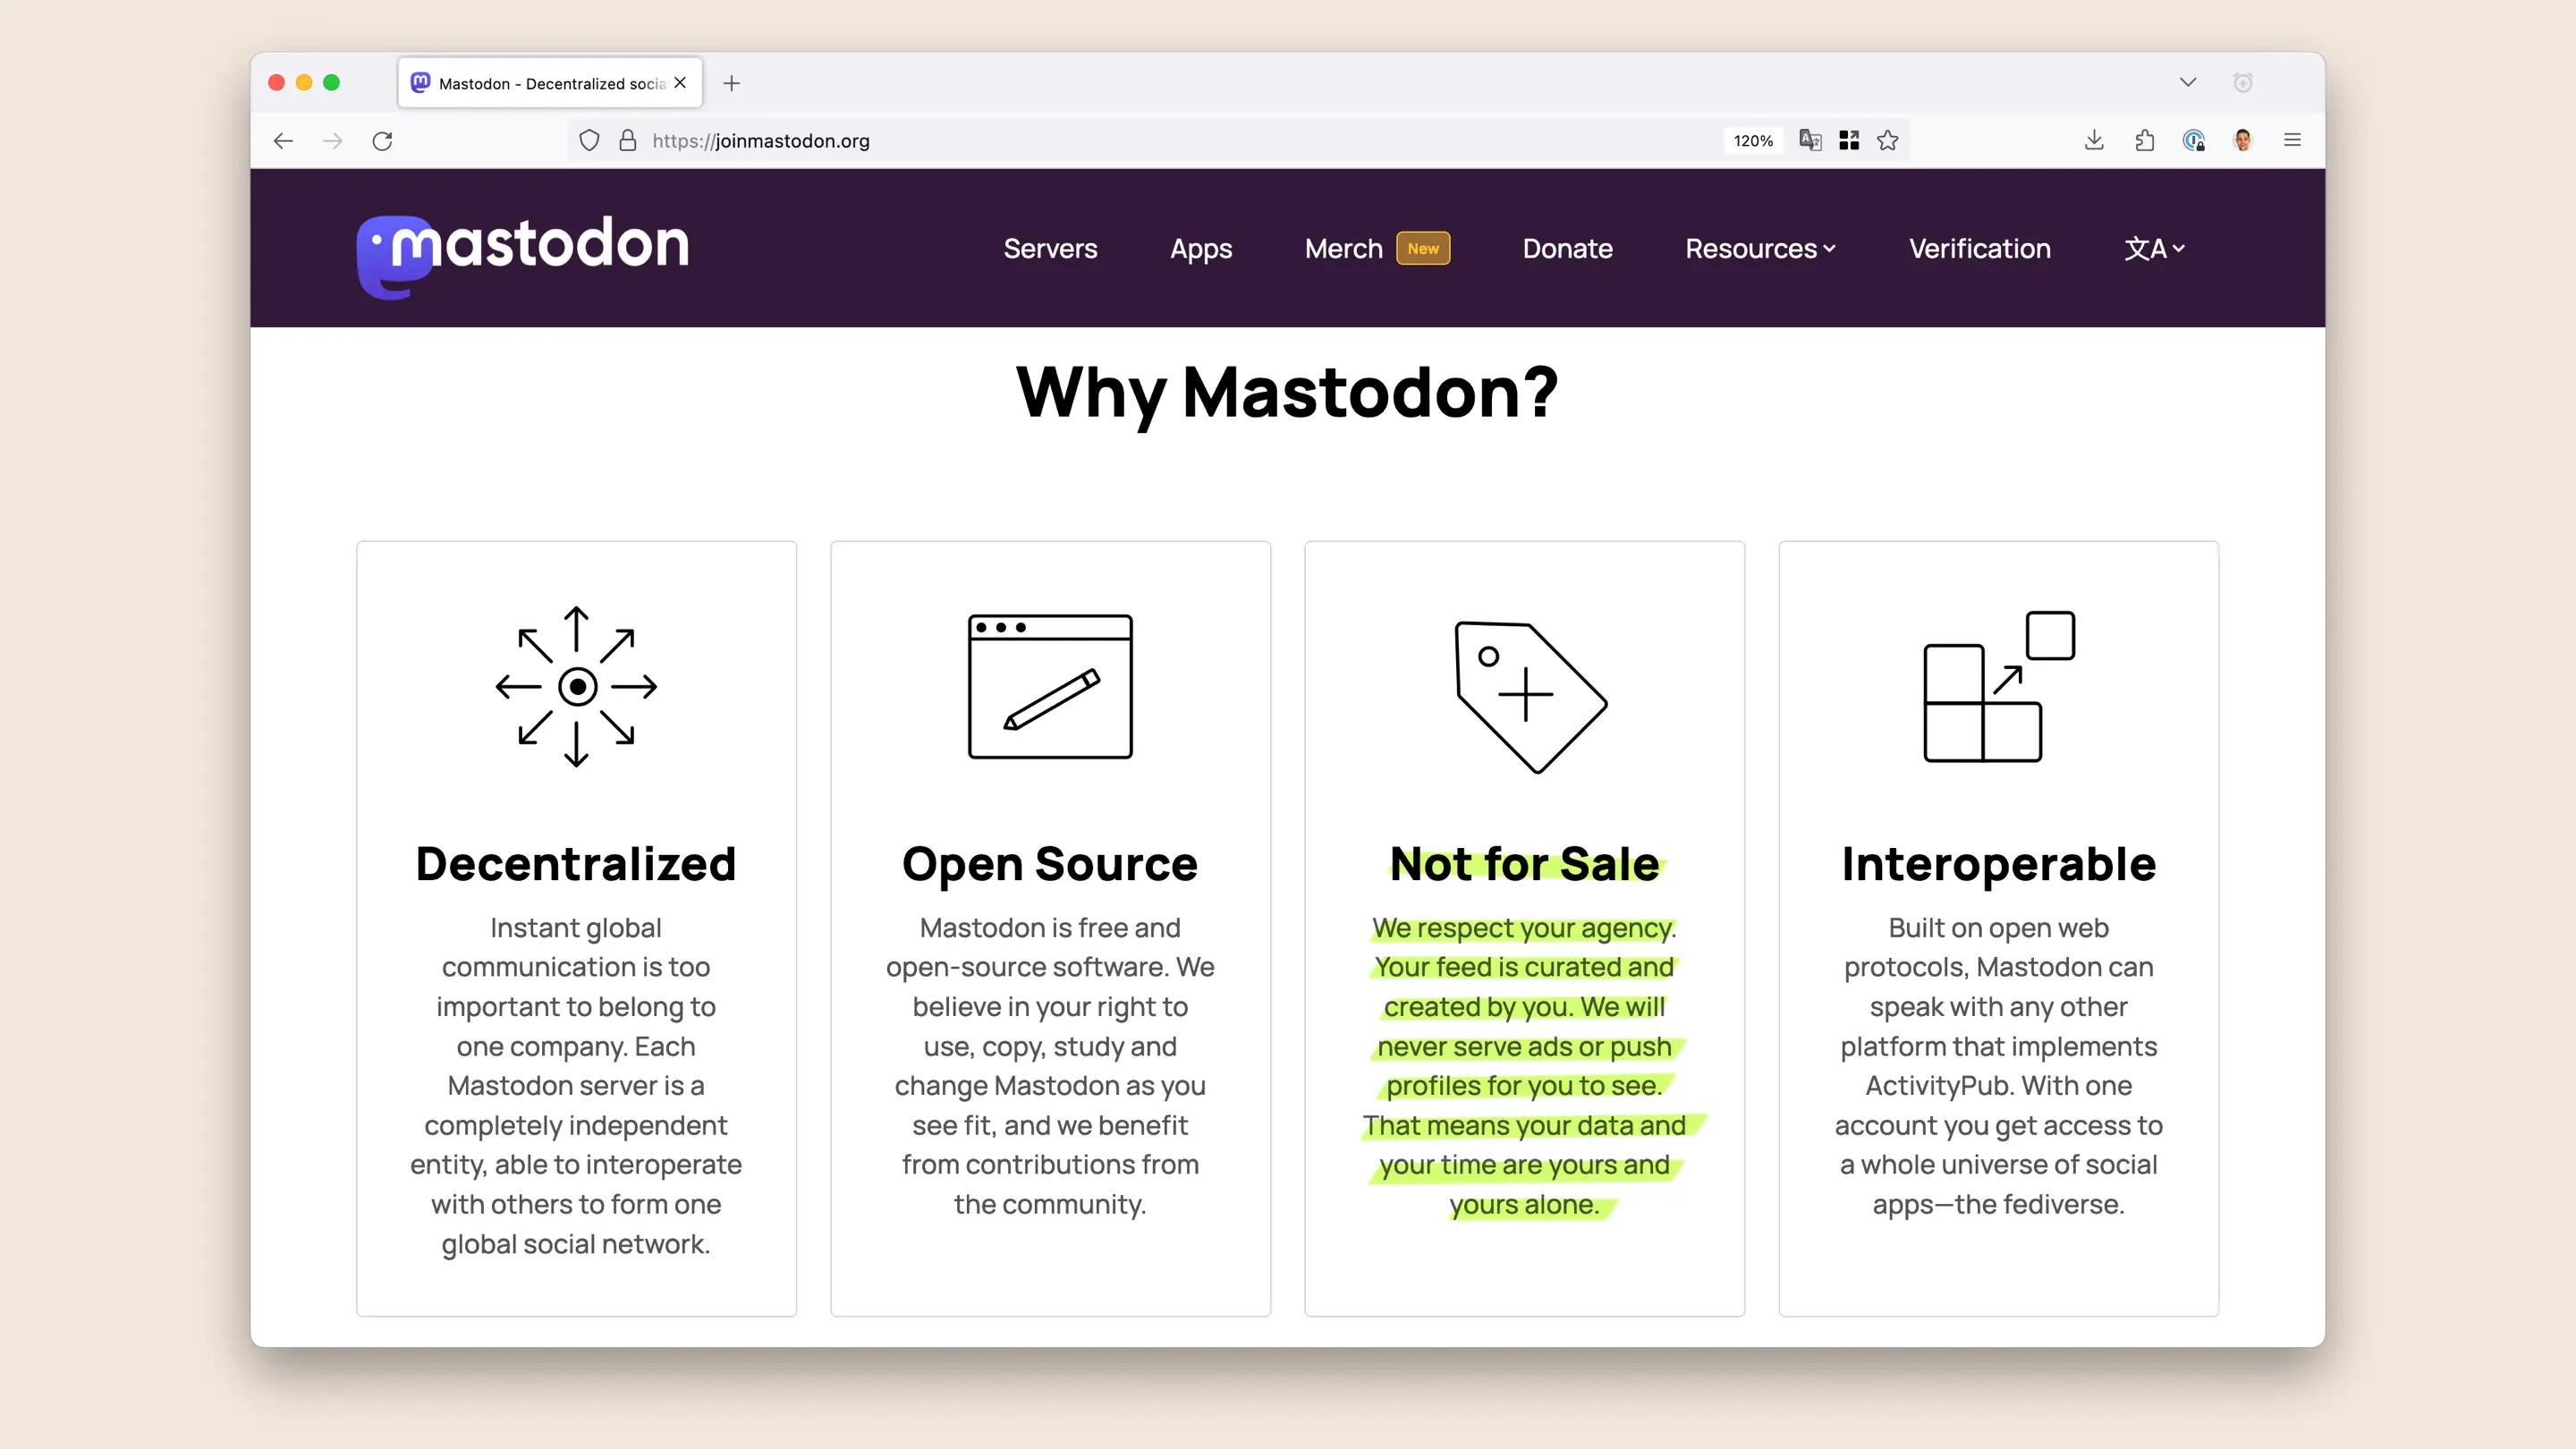 Screenshot of Mastodon's website. Headline: Why Mastodon? 4 points: Decentralized, open source, not for sale, interoperable. Highlighted text under not for sale point: We respect your agency. Your feed is curated and created by you. We will never serve ads or push profiles for you to see. That means your data and your time are yours and yours alone.